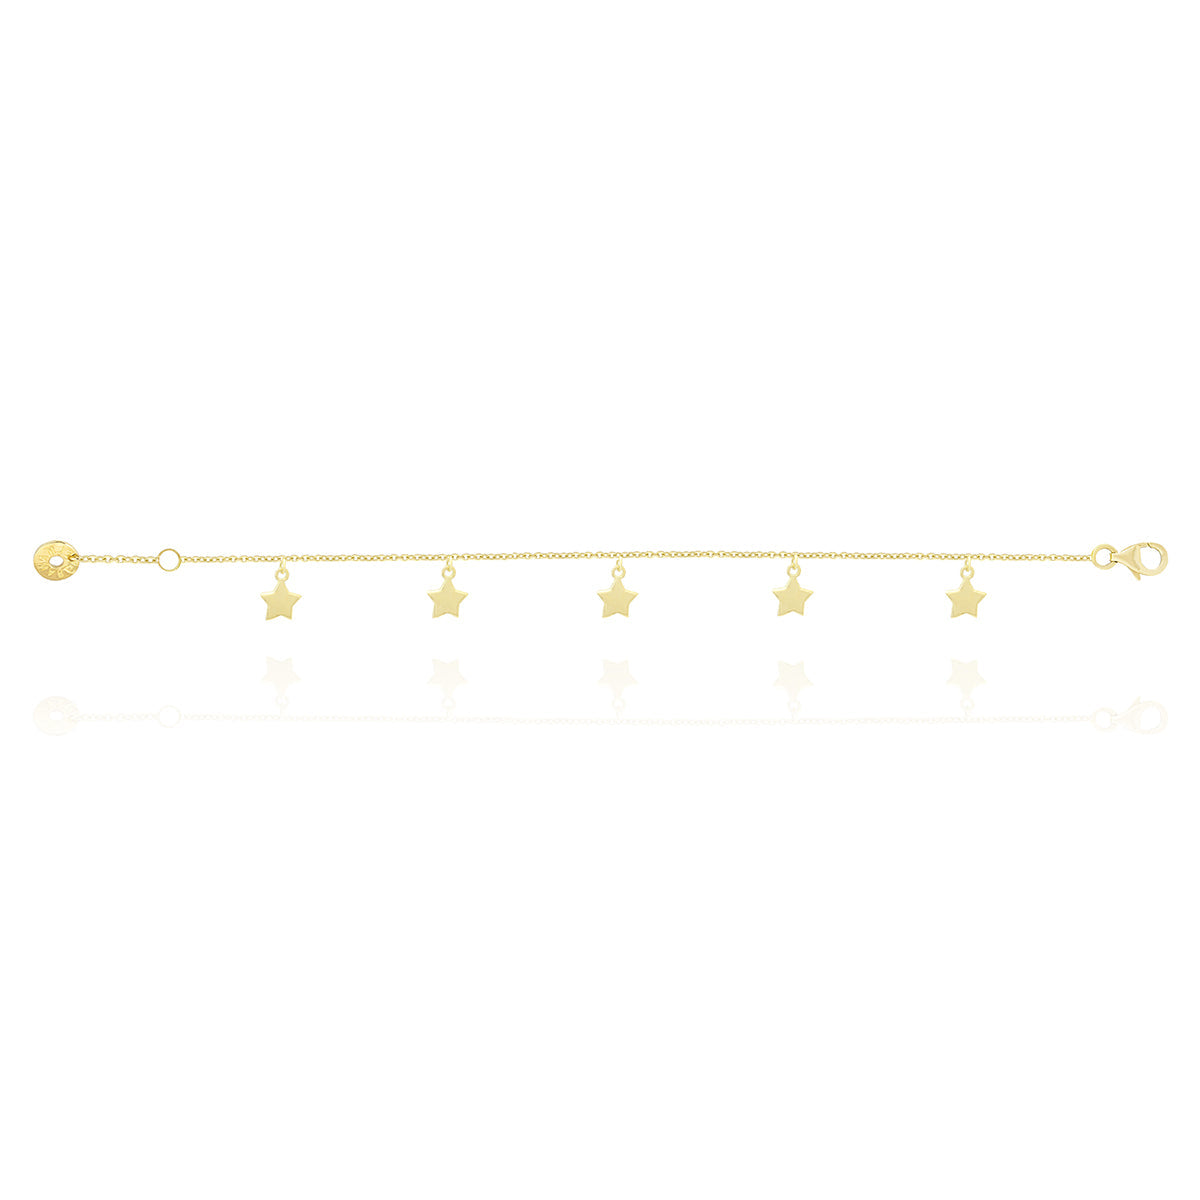 Star Charms Chain Bracelet in 18k Yellow Gold